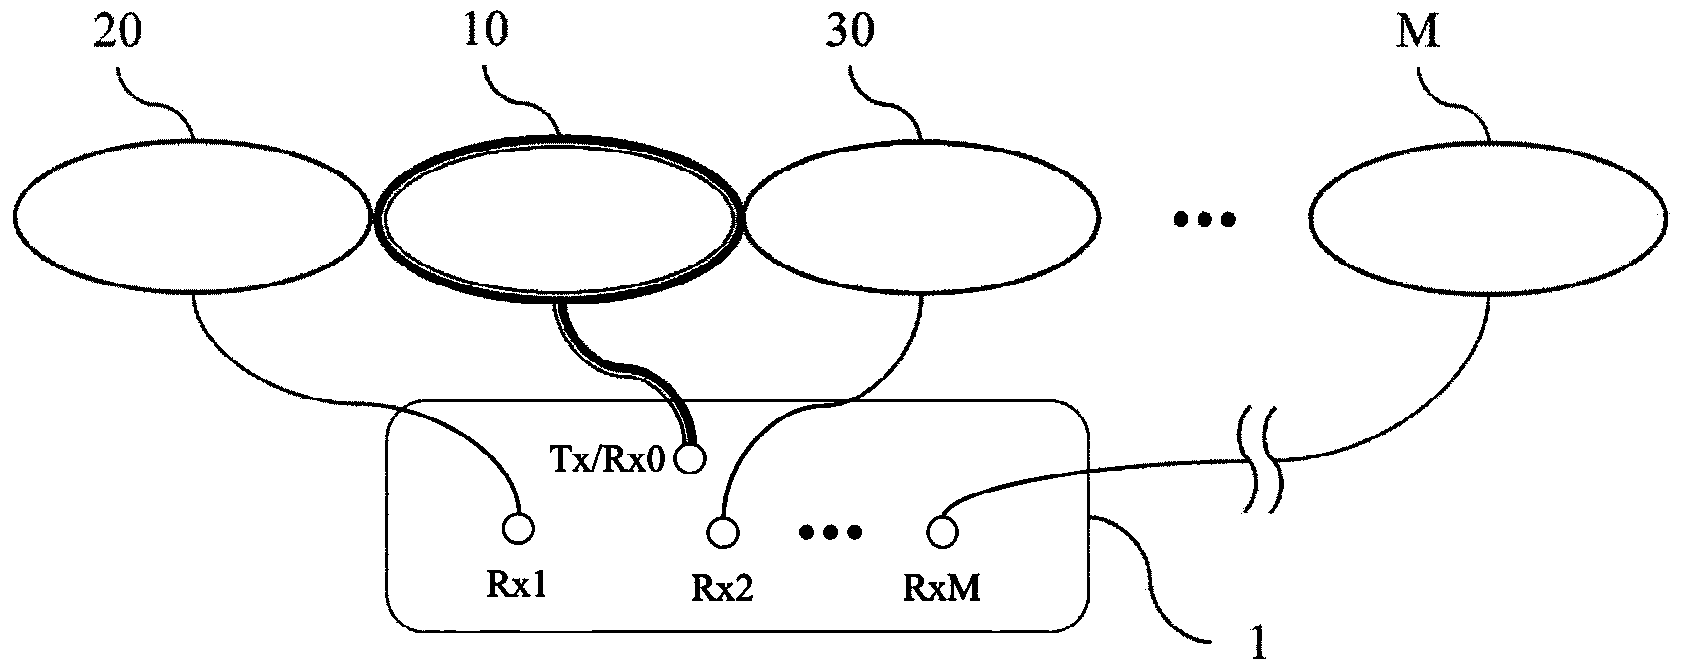 Nuclear magnetic resonance signal real-time noise offsetting device for multiple near-end reference coils